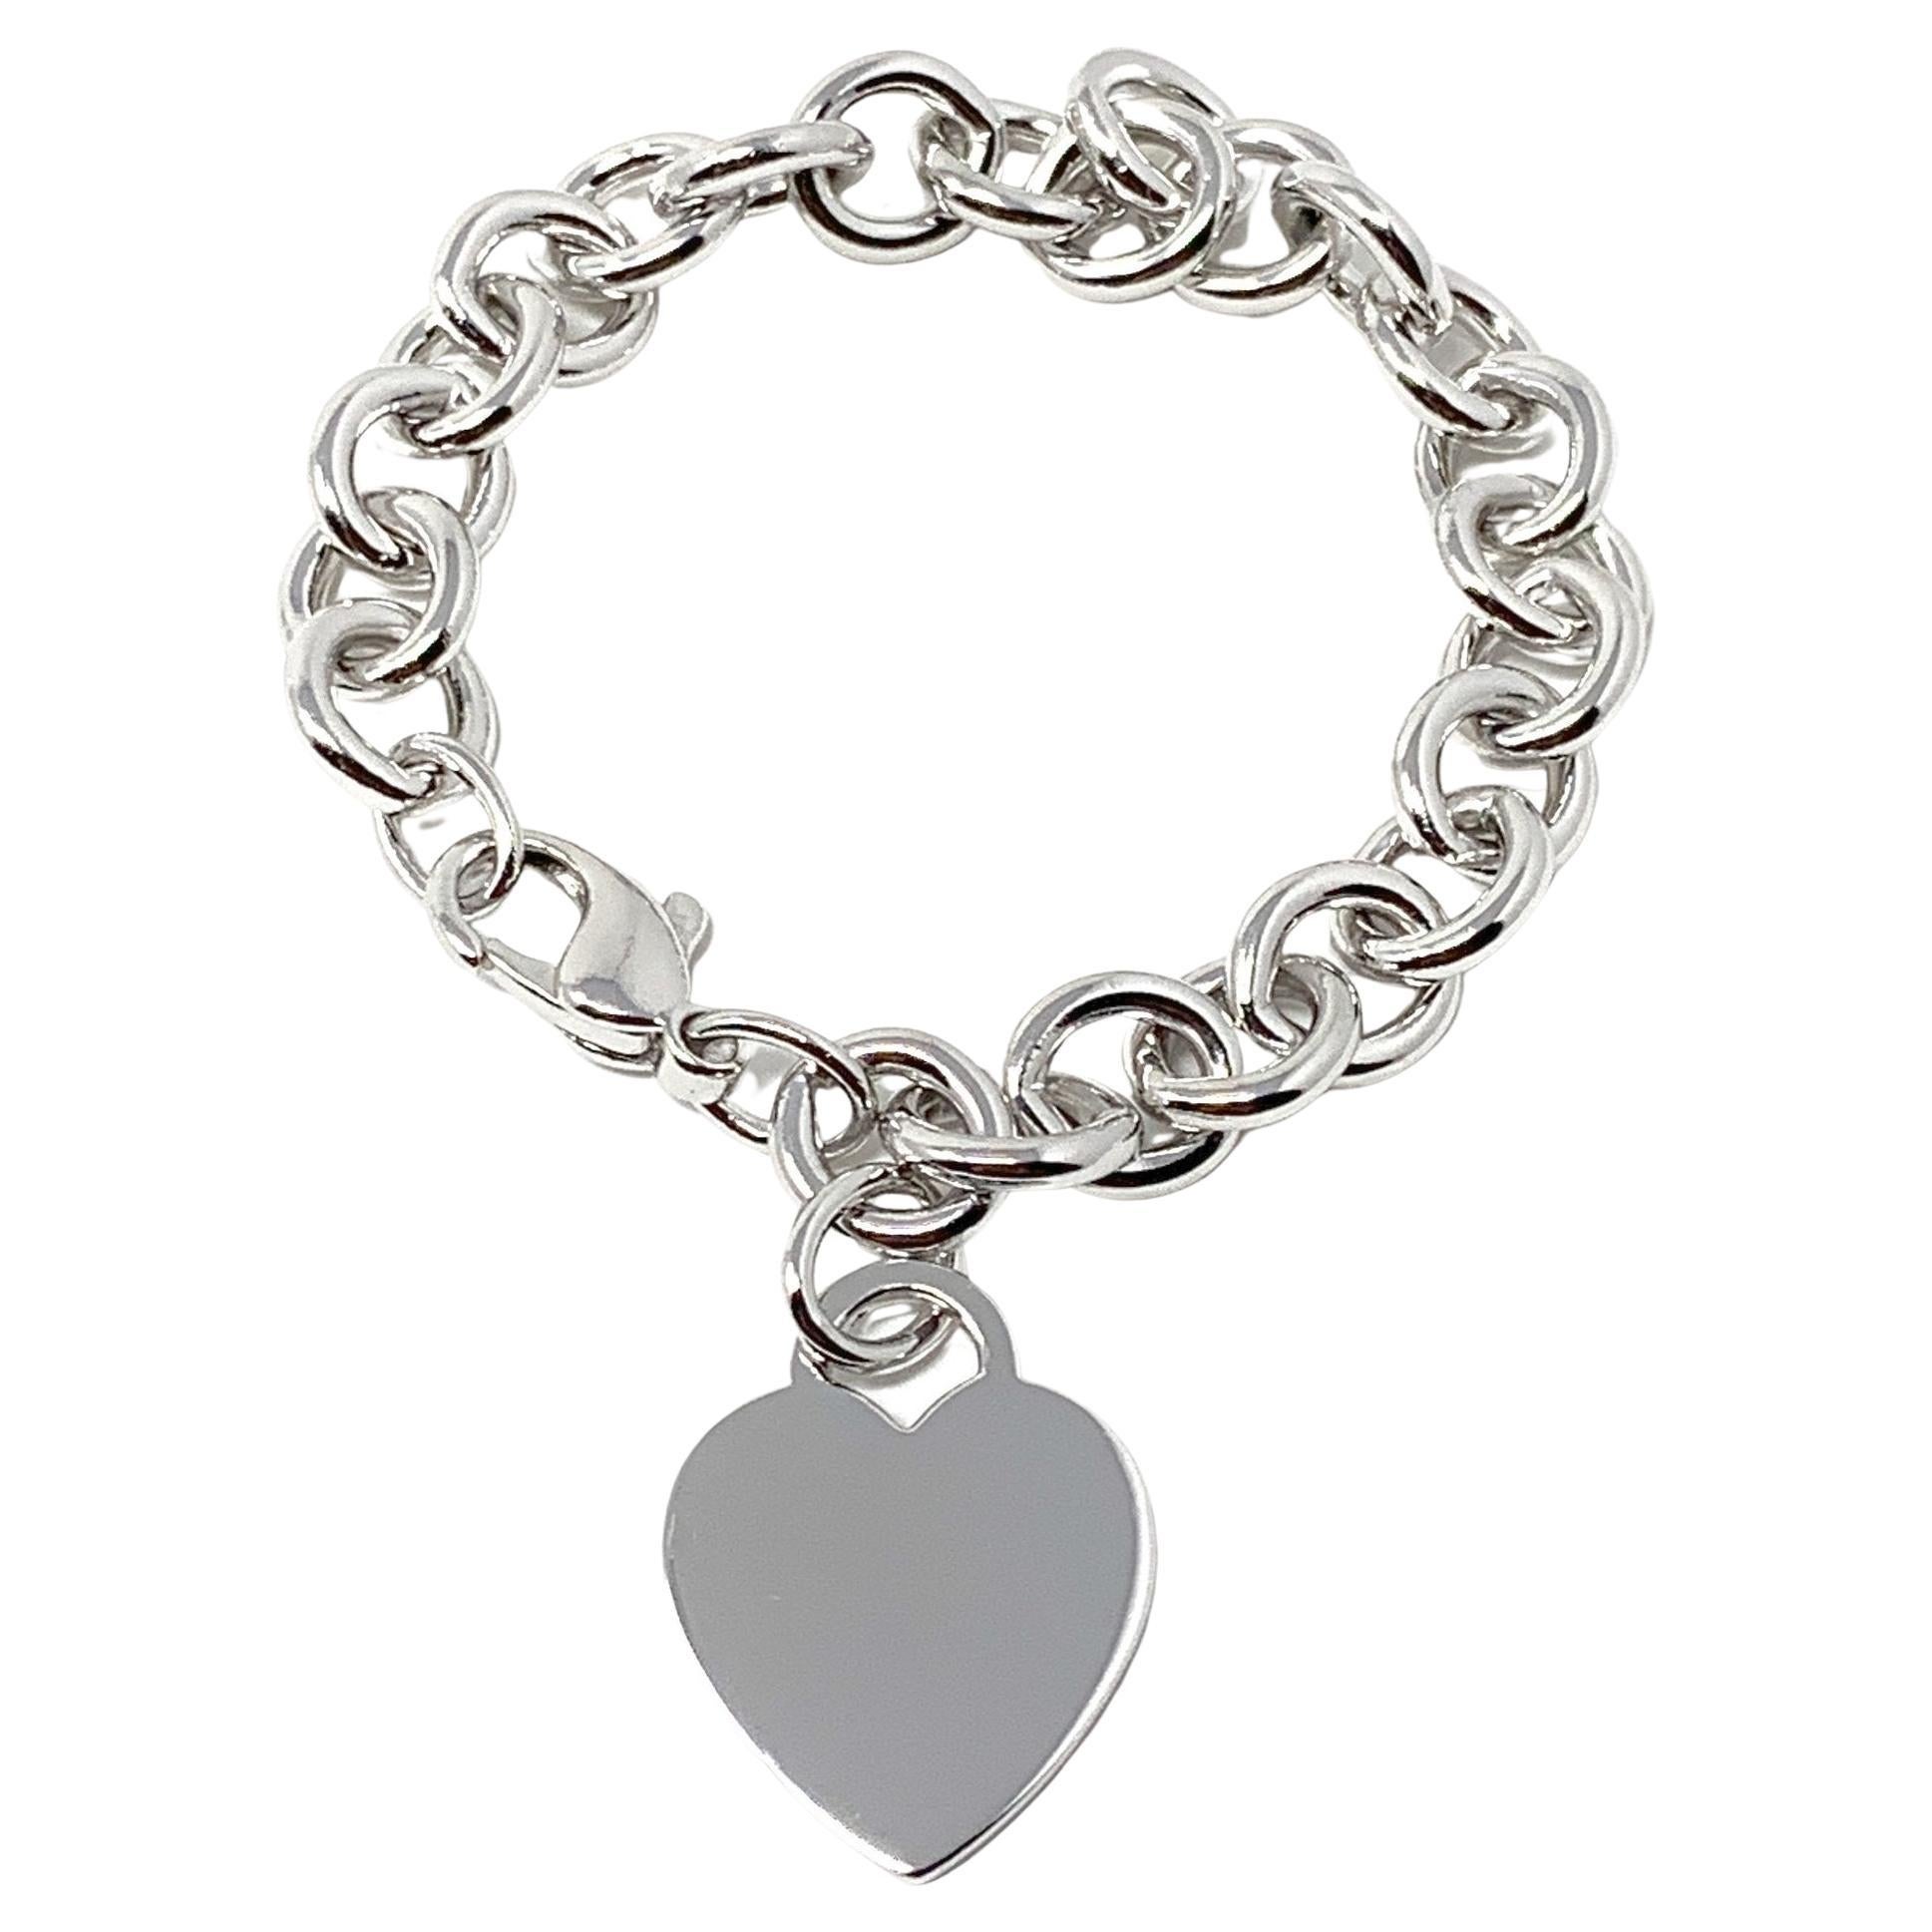 Tiffany & Co. Silver Heart Charm White Gold Plated Bracelet For Sale